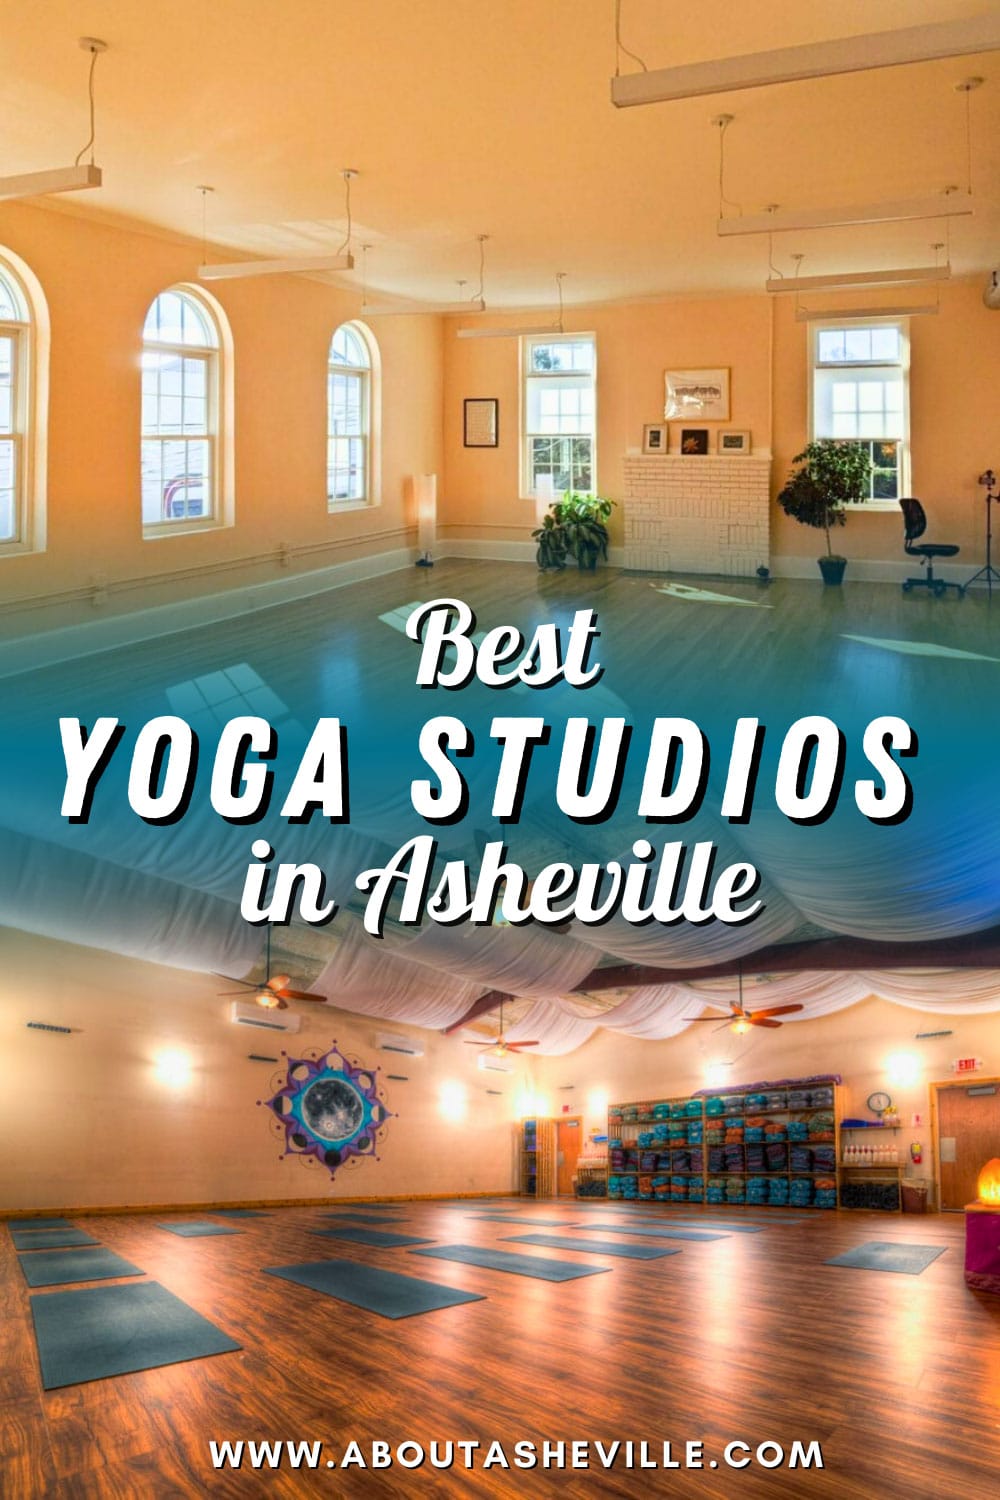 Yoga In Asheville: The Best Yoga Studios, Classes, And Events - About  Asheville